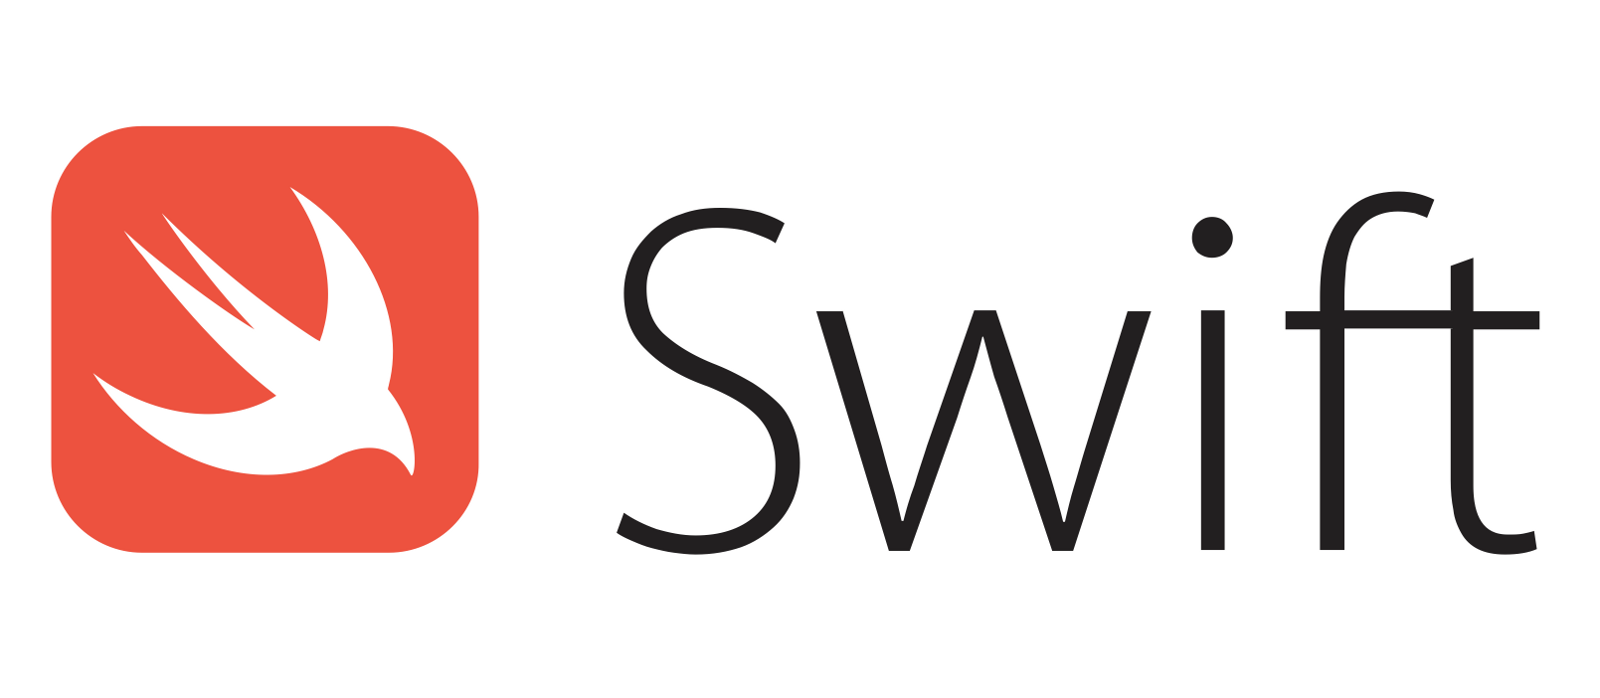 How to use UIImageView & UIScrollView to swipe through images - Swift iOS